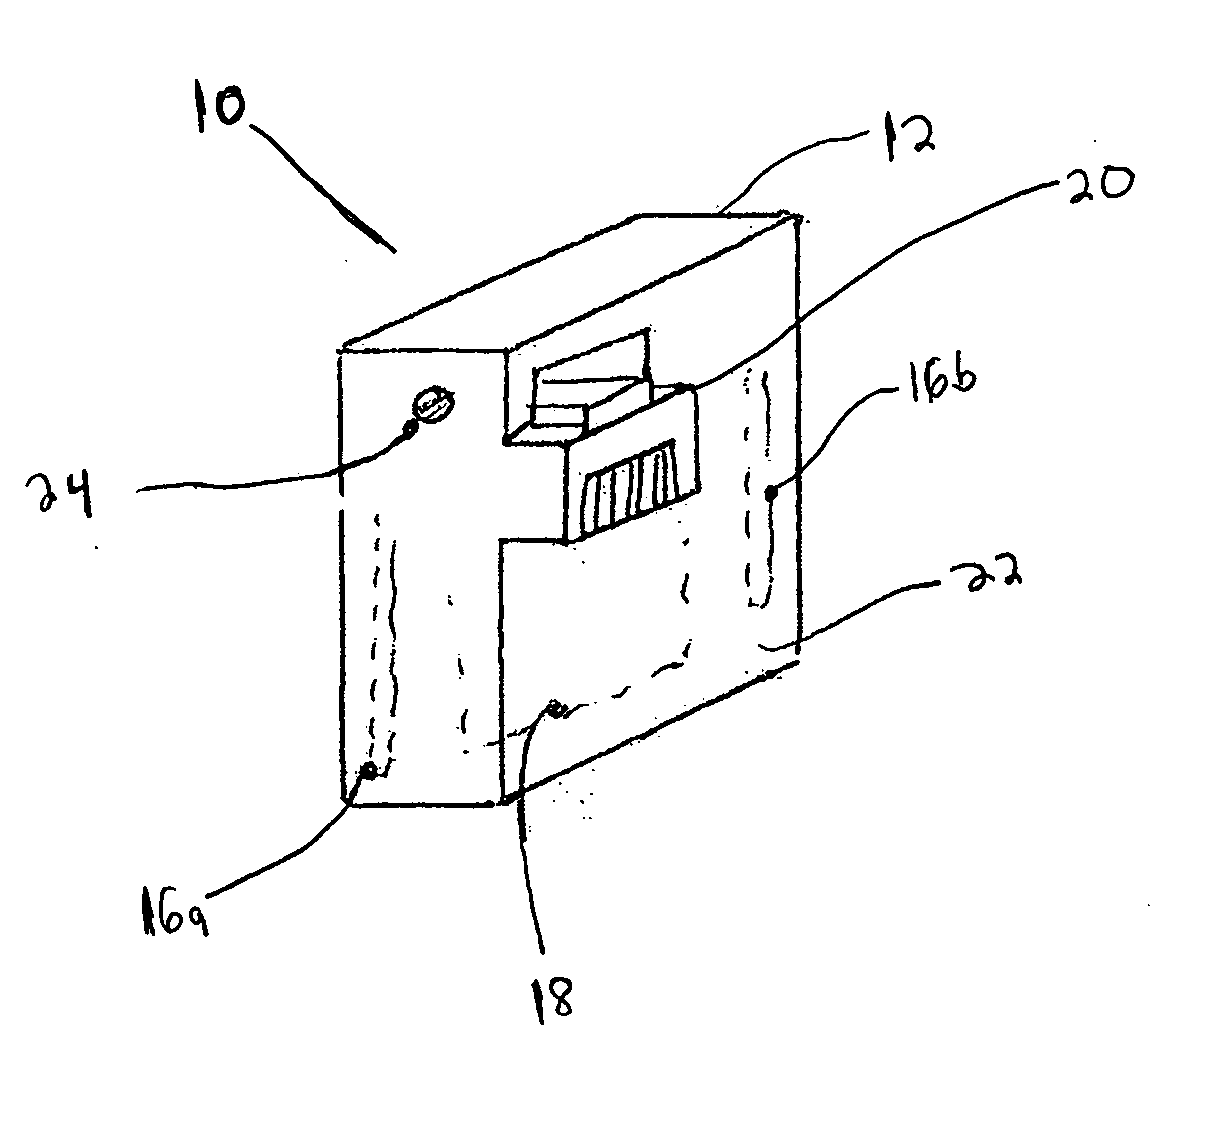 Plug-in Wi-Fi access point device and system